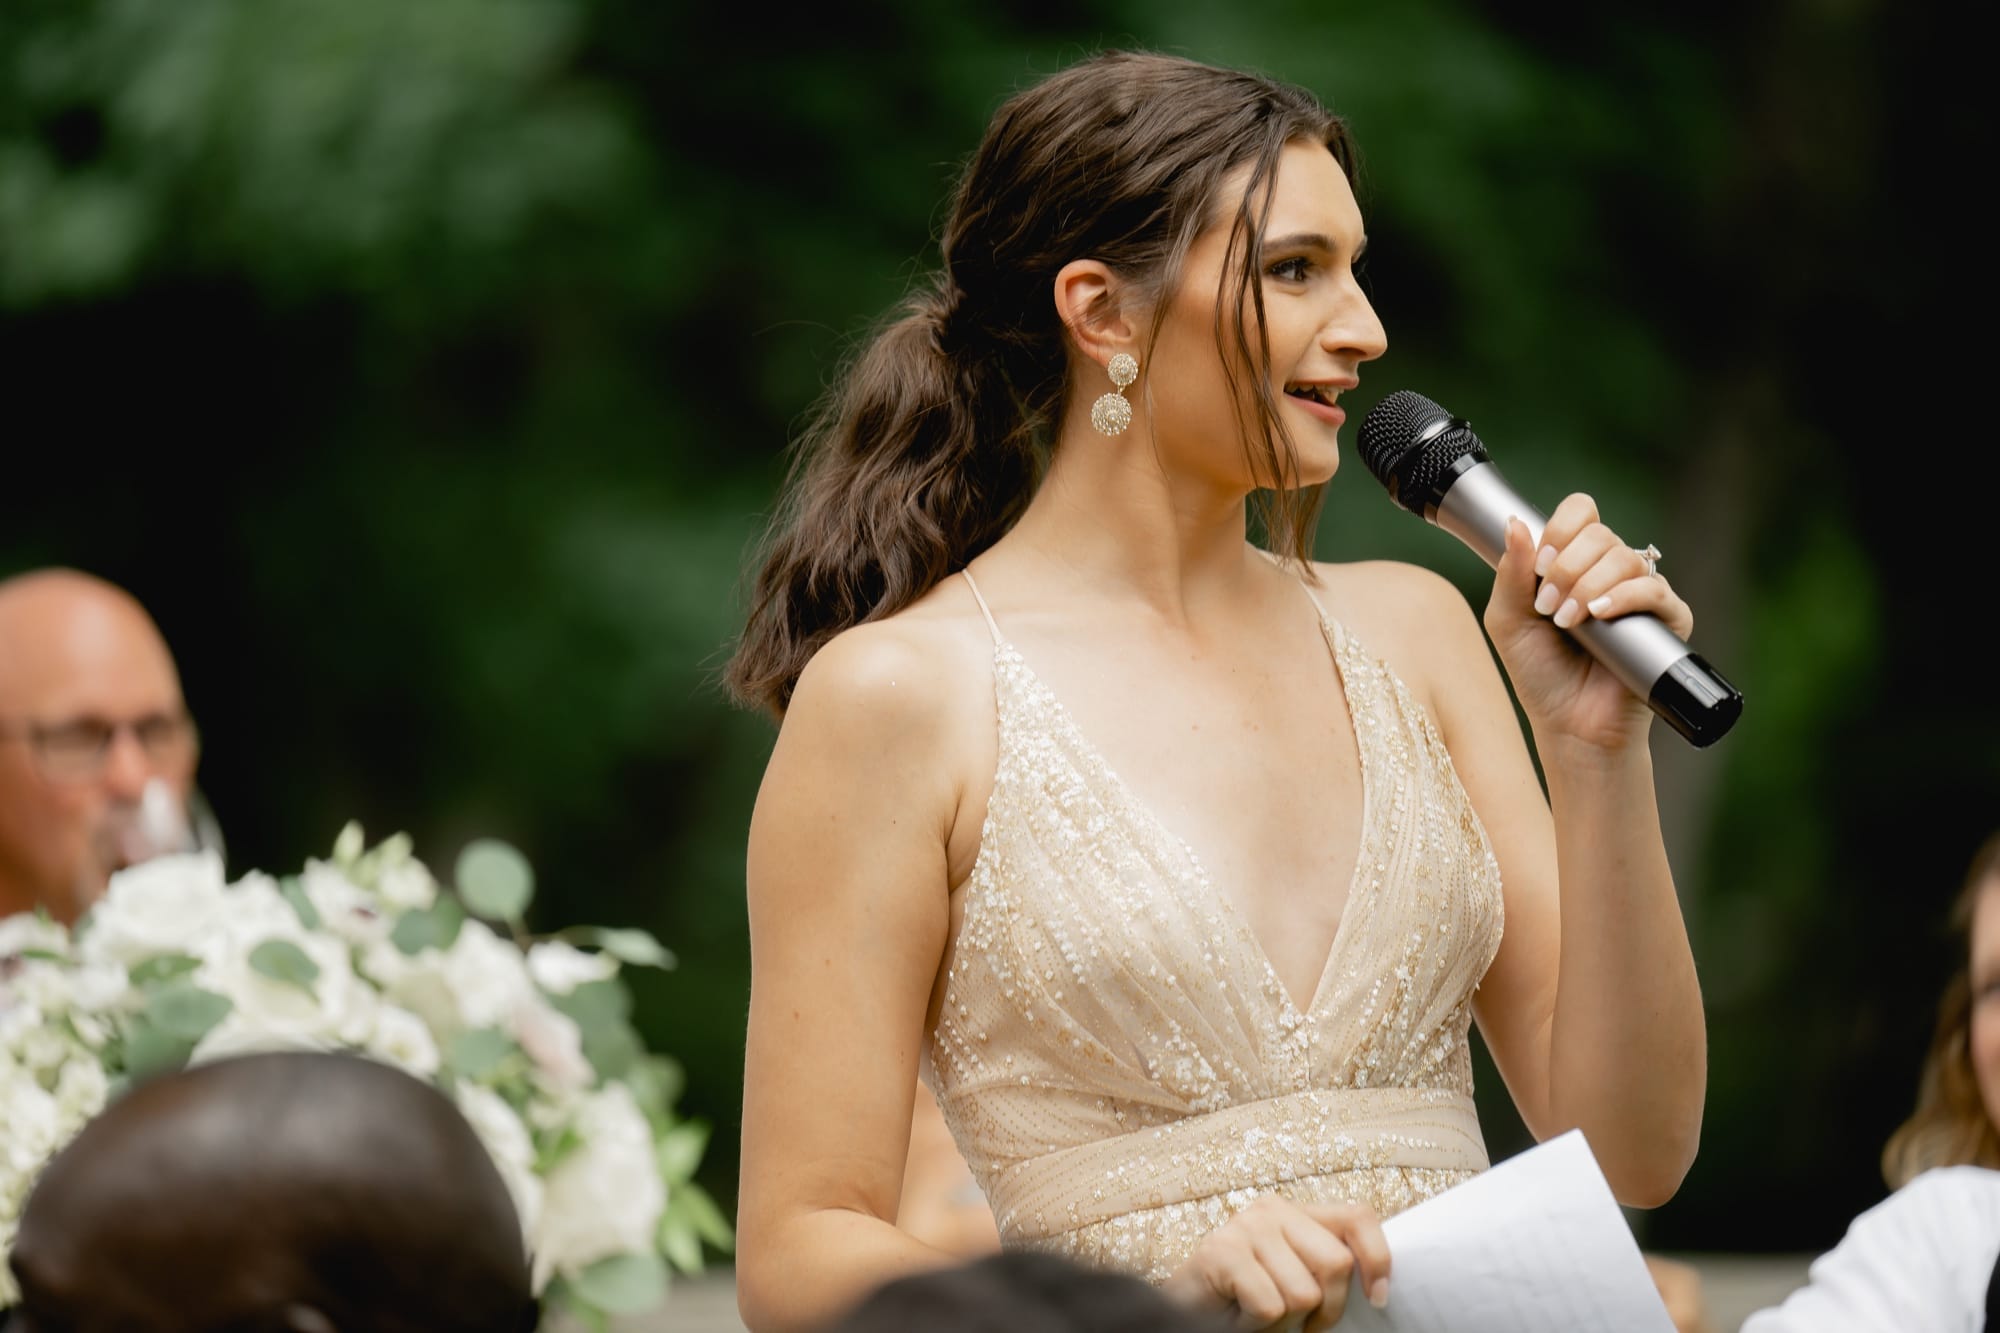 Matron of honor and sister speech